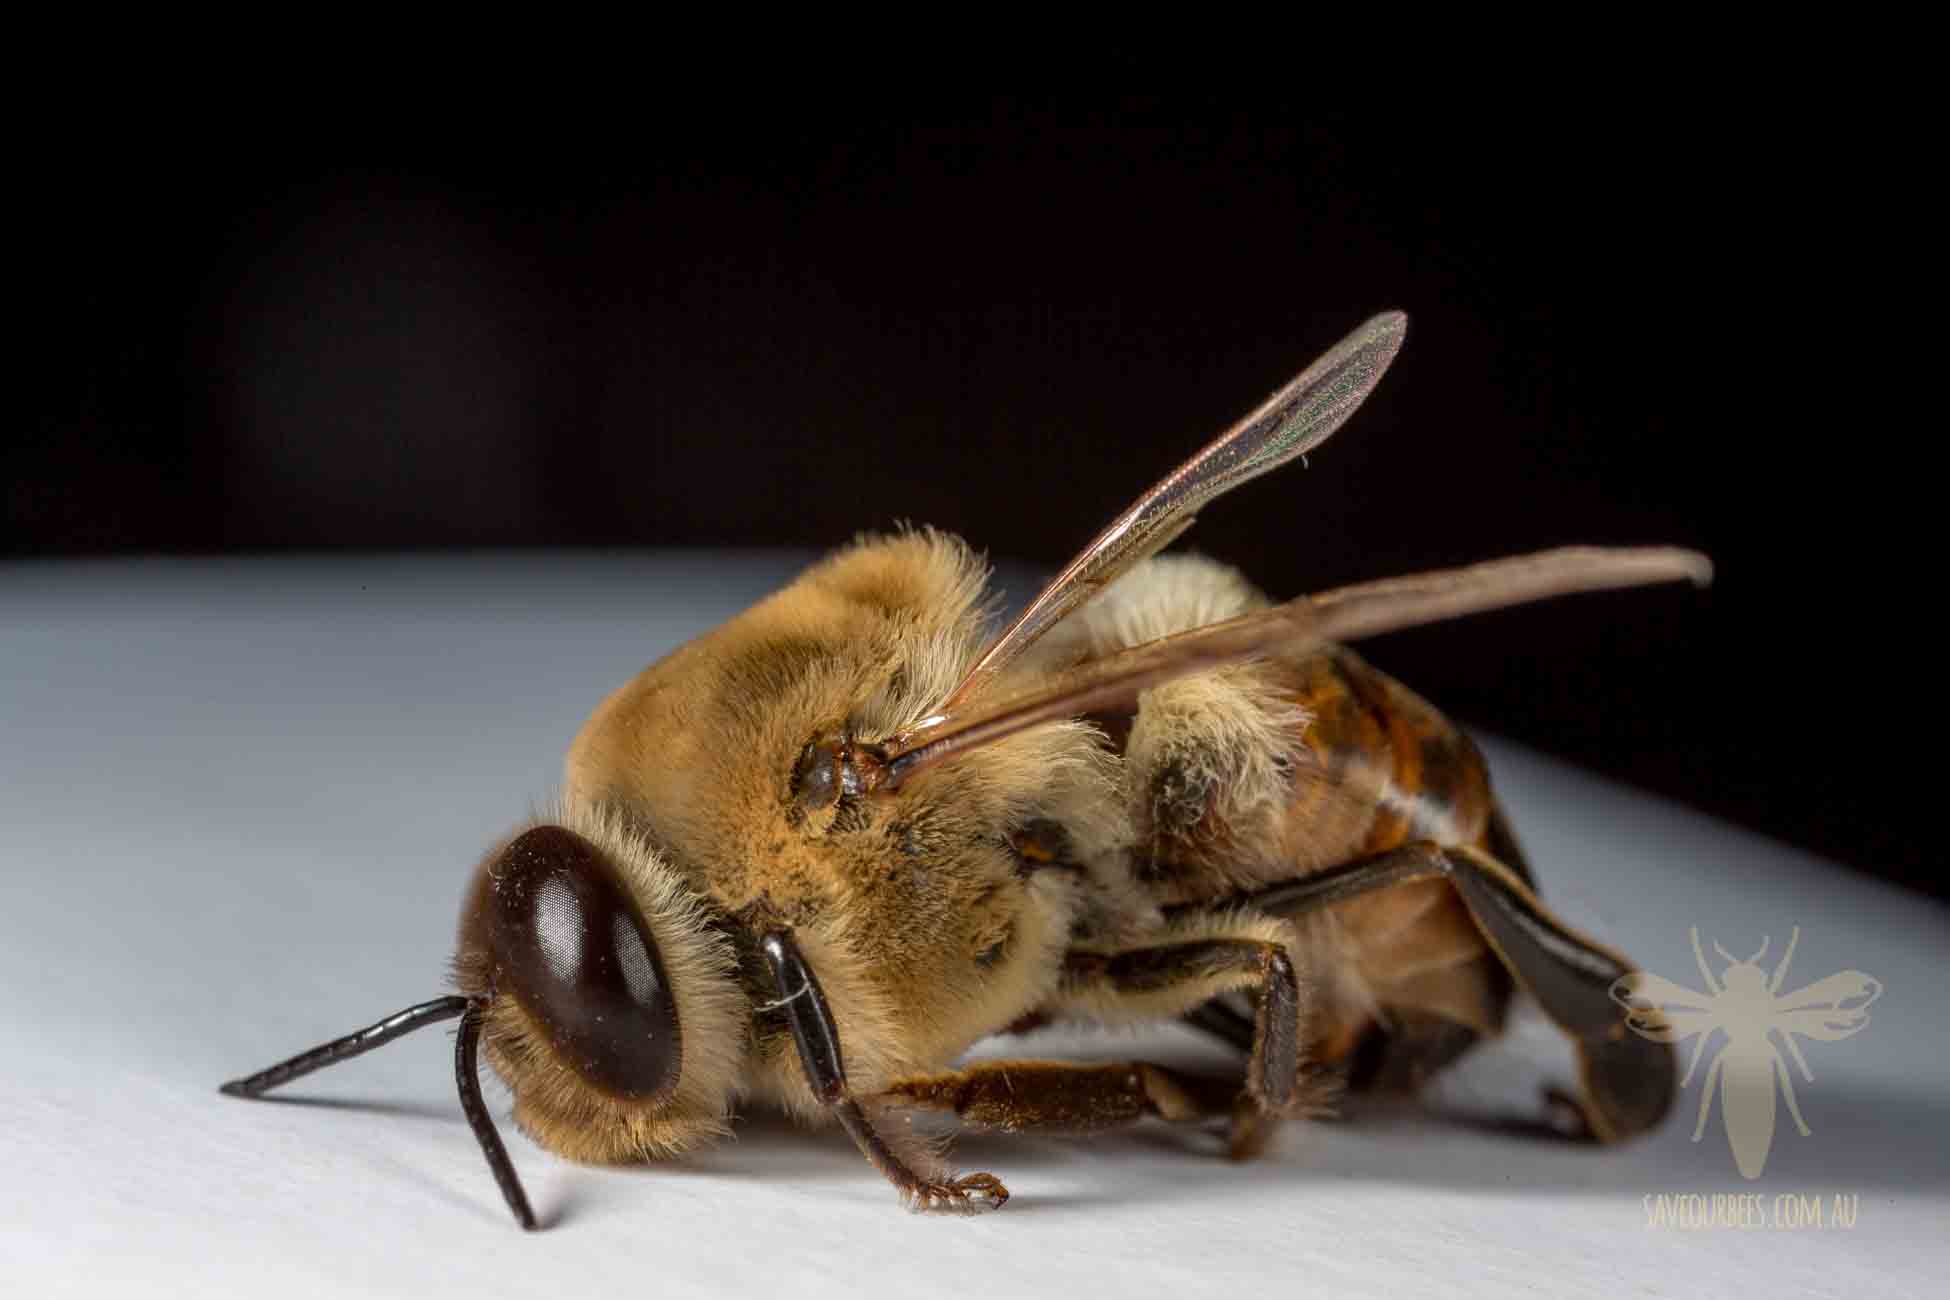 Drone Honey Bee: Study in Macro | Save Our Bees Australia